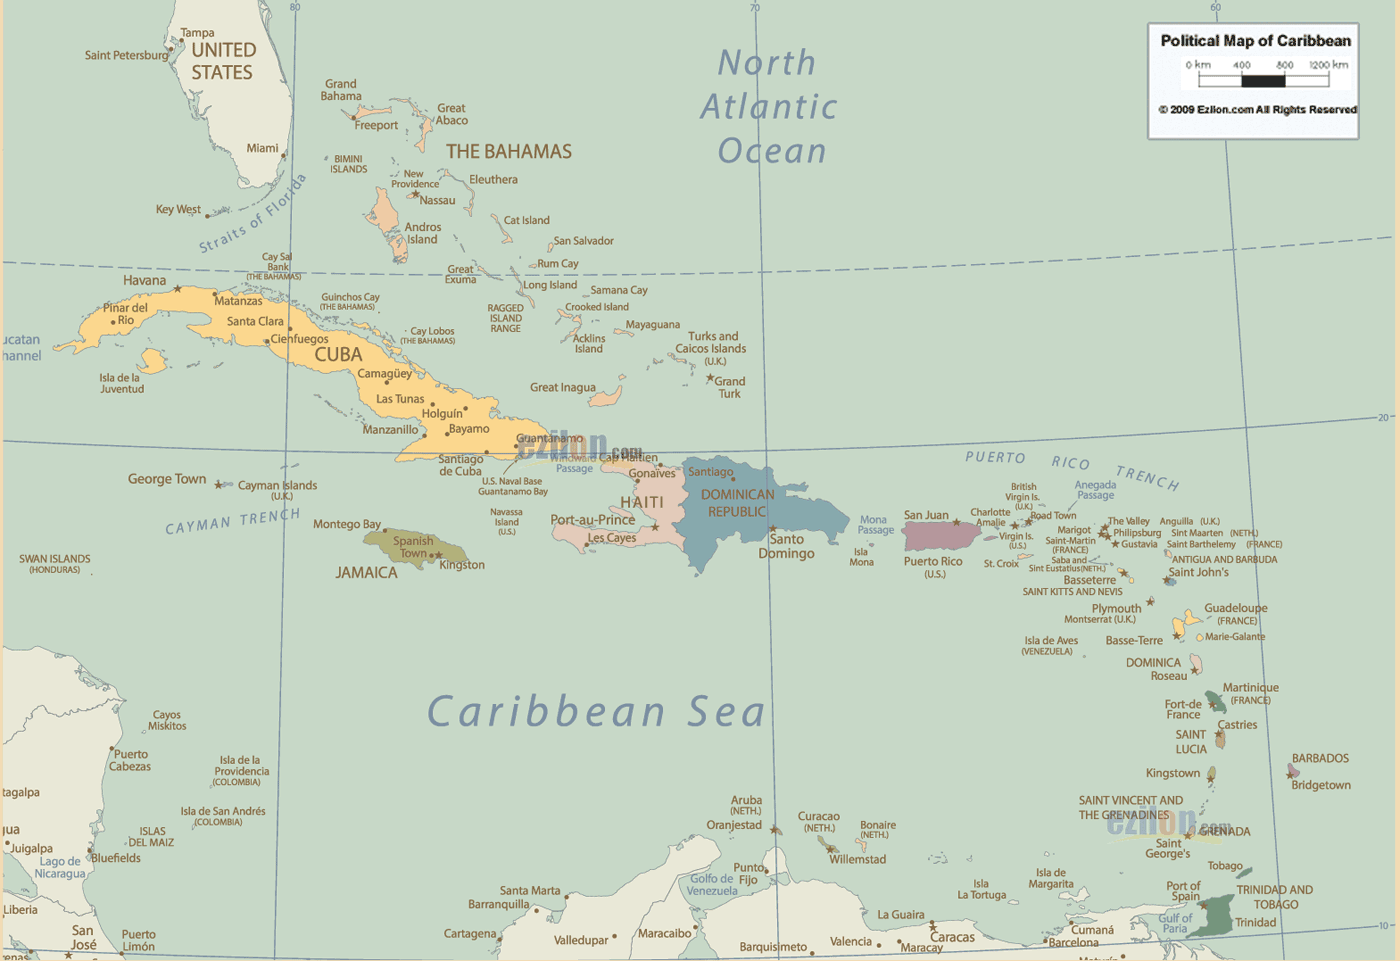 Detailed Map of Caribbean showing all countries maps, names of capital cities, towns, states, provinces and boundaries of neighbouring countries.